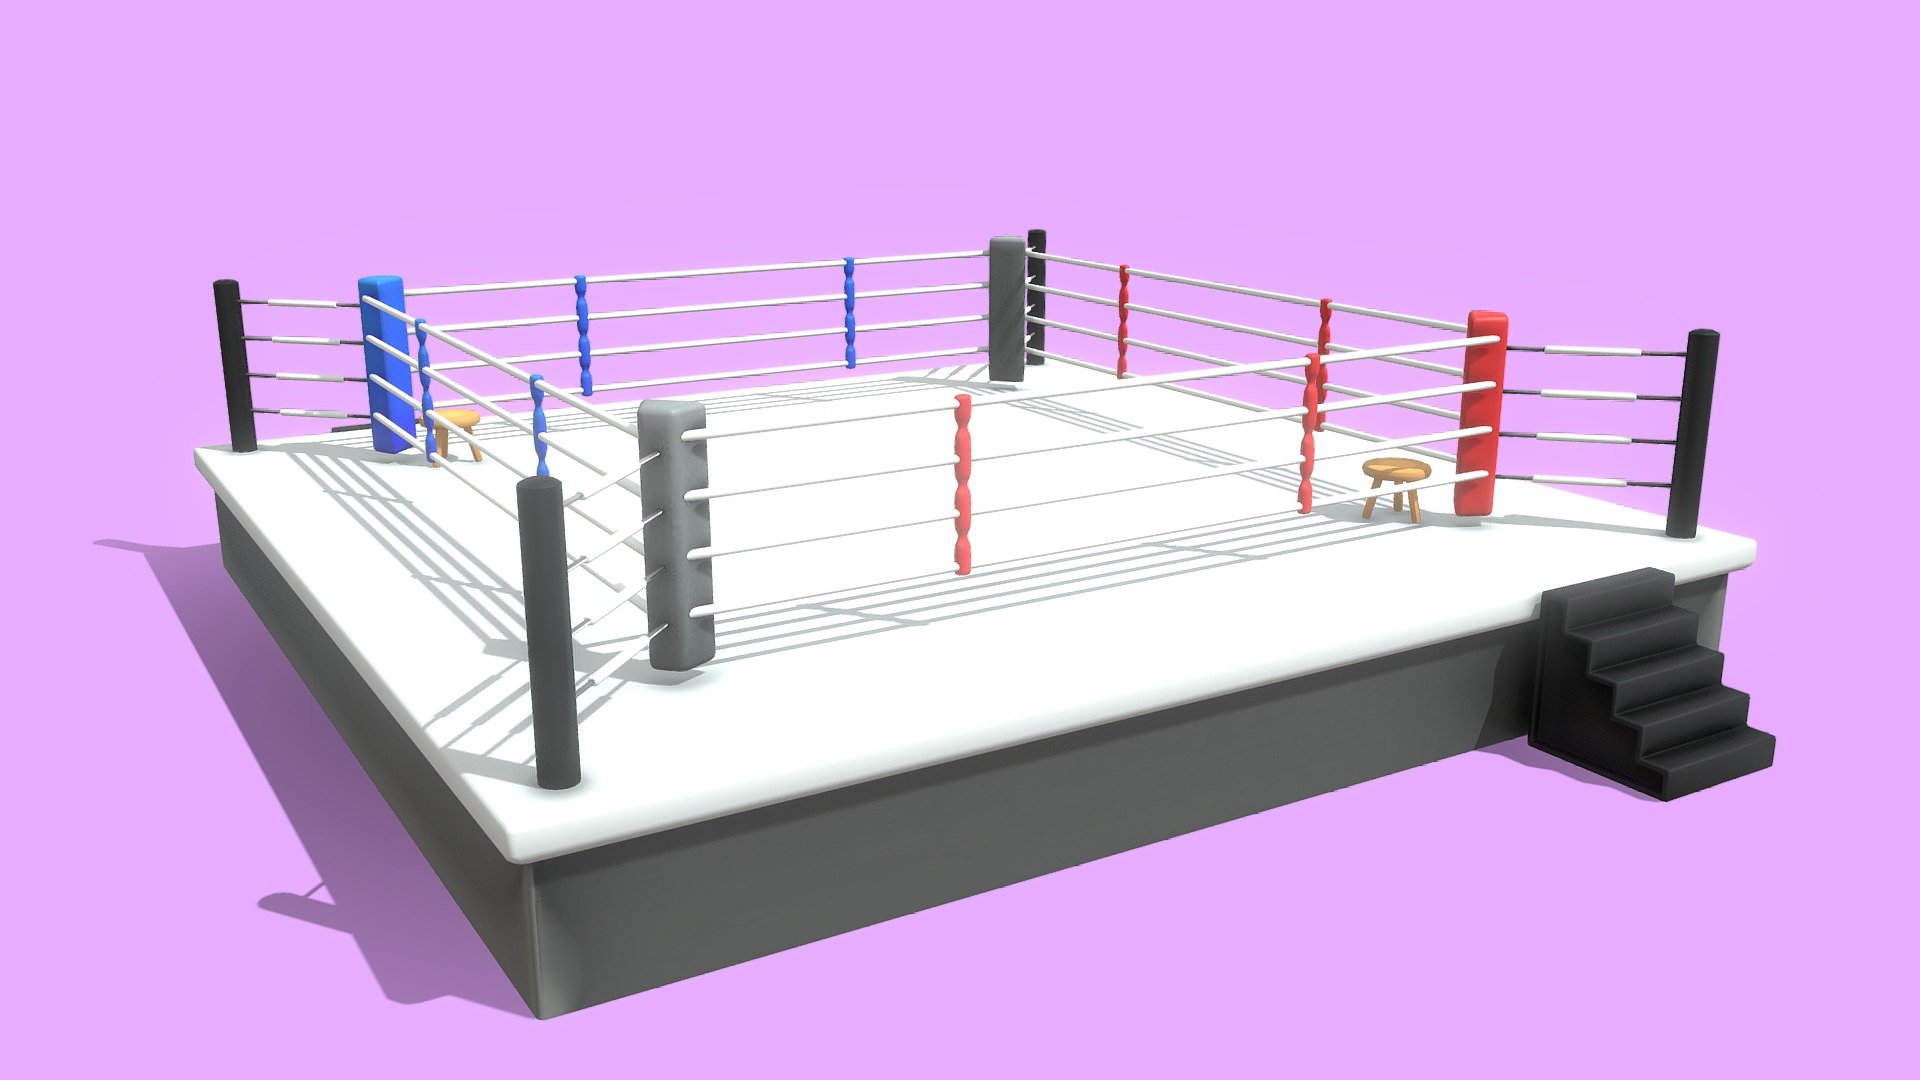 A Boxing ring with a lot of rounded/beveled edges and corners.
Not intended to be accurate but for props or asset purposes.

3D MODEL




includes FBX file with embedded textures

includes OBJ and MTL files

includes BLENDER file

includes Textures folder

Textures resolution is 2048x2048 each.

4 Meshes x 5 Materials each = 20 Image Files.

Meshes are : Floor, Ropes, Stairs, and Stool

Materials are : Base Color, Metallic, Roughness, Normals, Height

Textures are in PNG format.
 - Boxing Ring - 3D model by AnshiNoWara NG+ (@Anshinowara2) 3d model